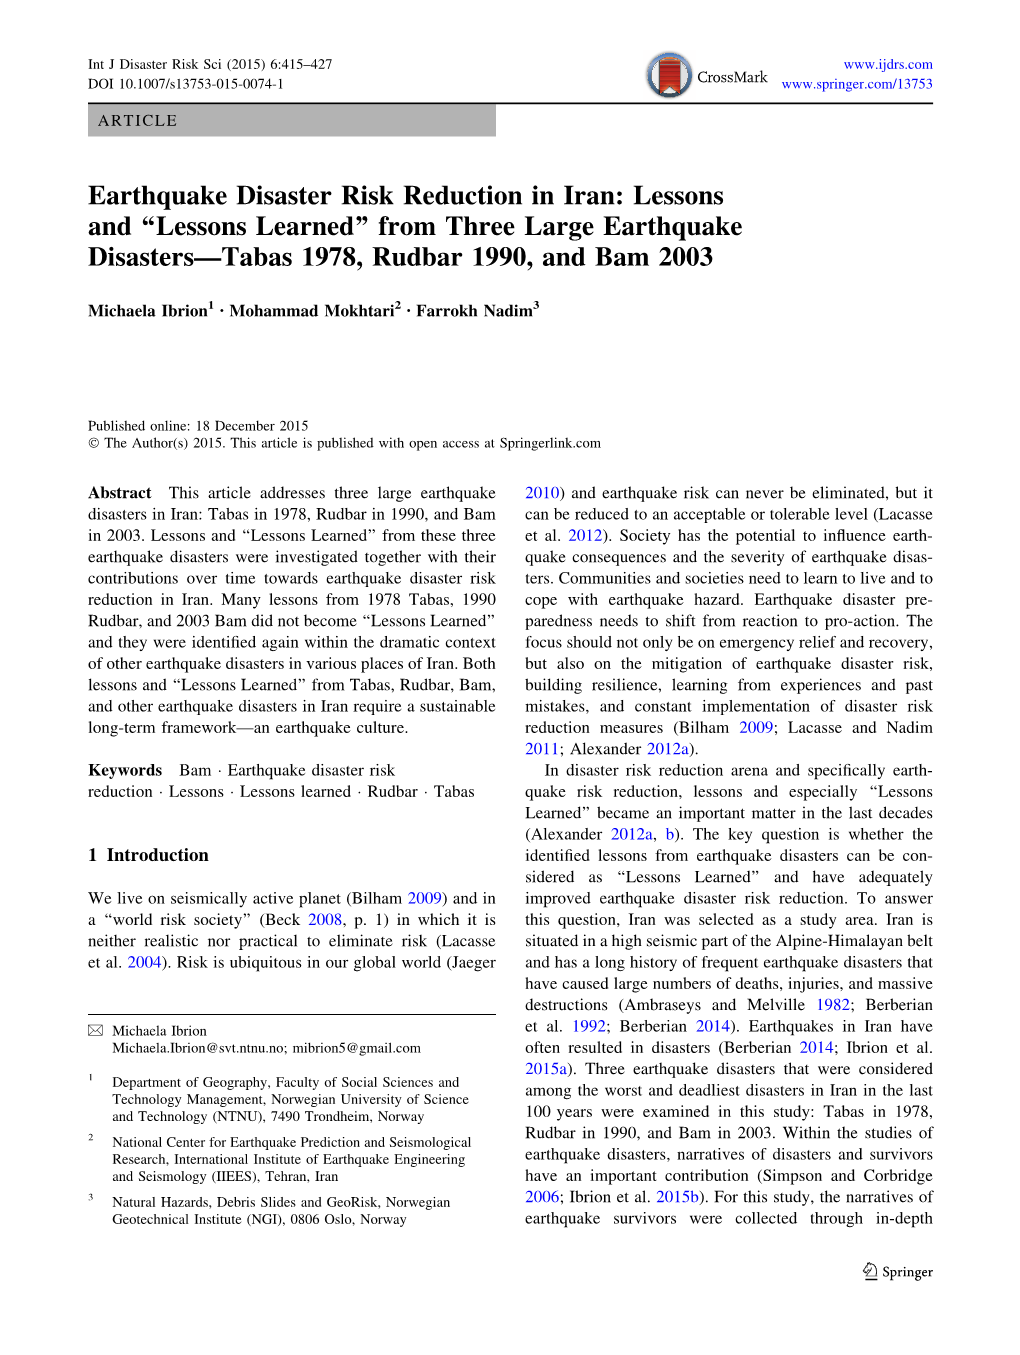 Earthquake Disaster Risk Reduction in Iran: Lessons and ‘‘Lessons Learned’’ from Three Large Earthquake Disasters—Tabas 1978, Rudbar 1990, and Bam 2003